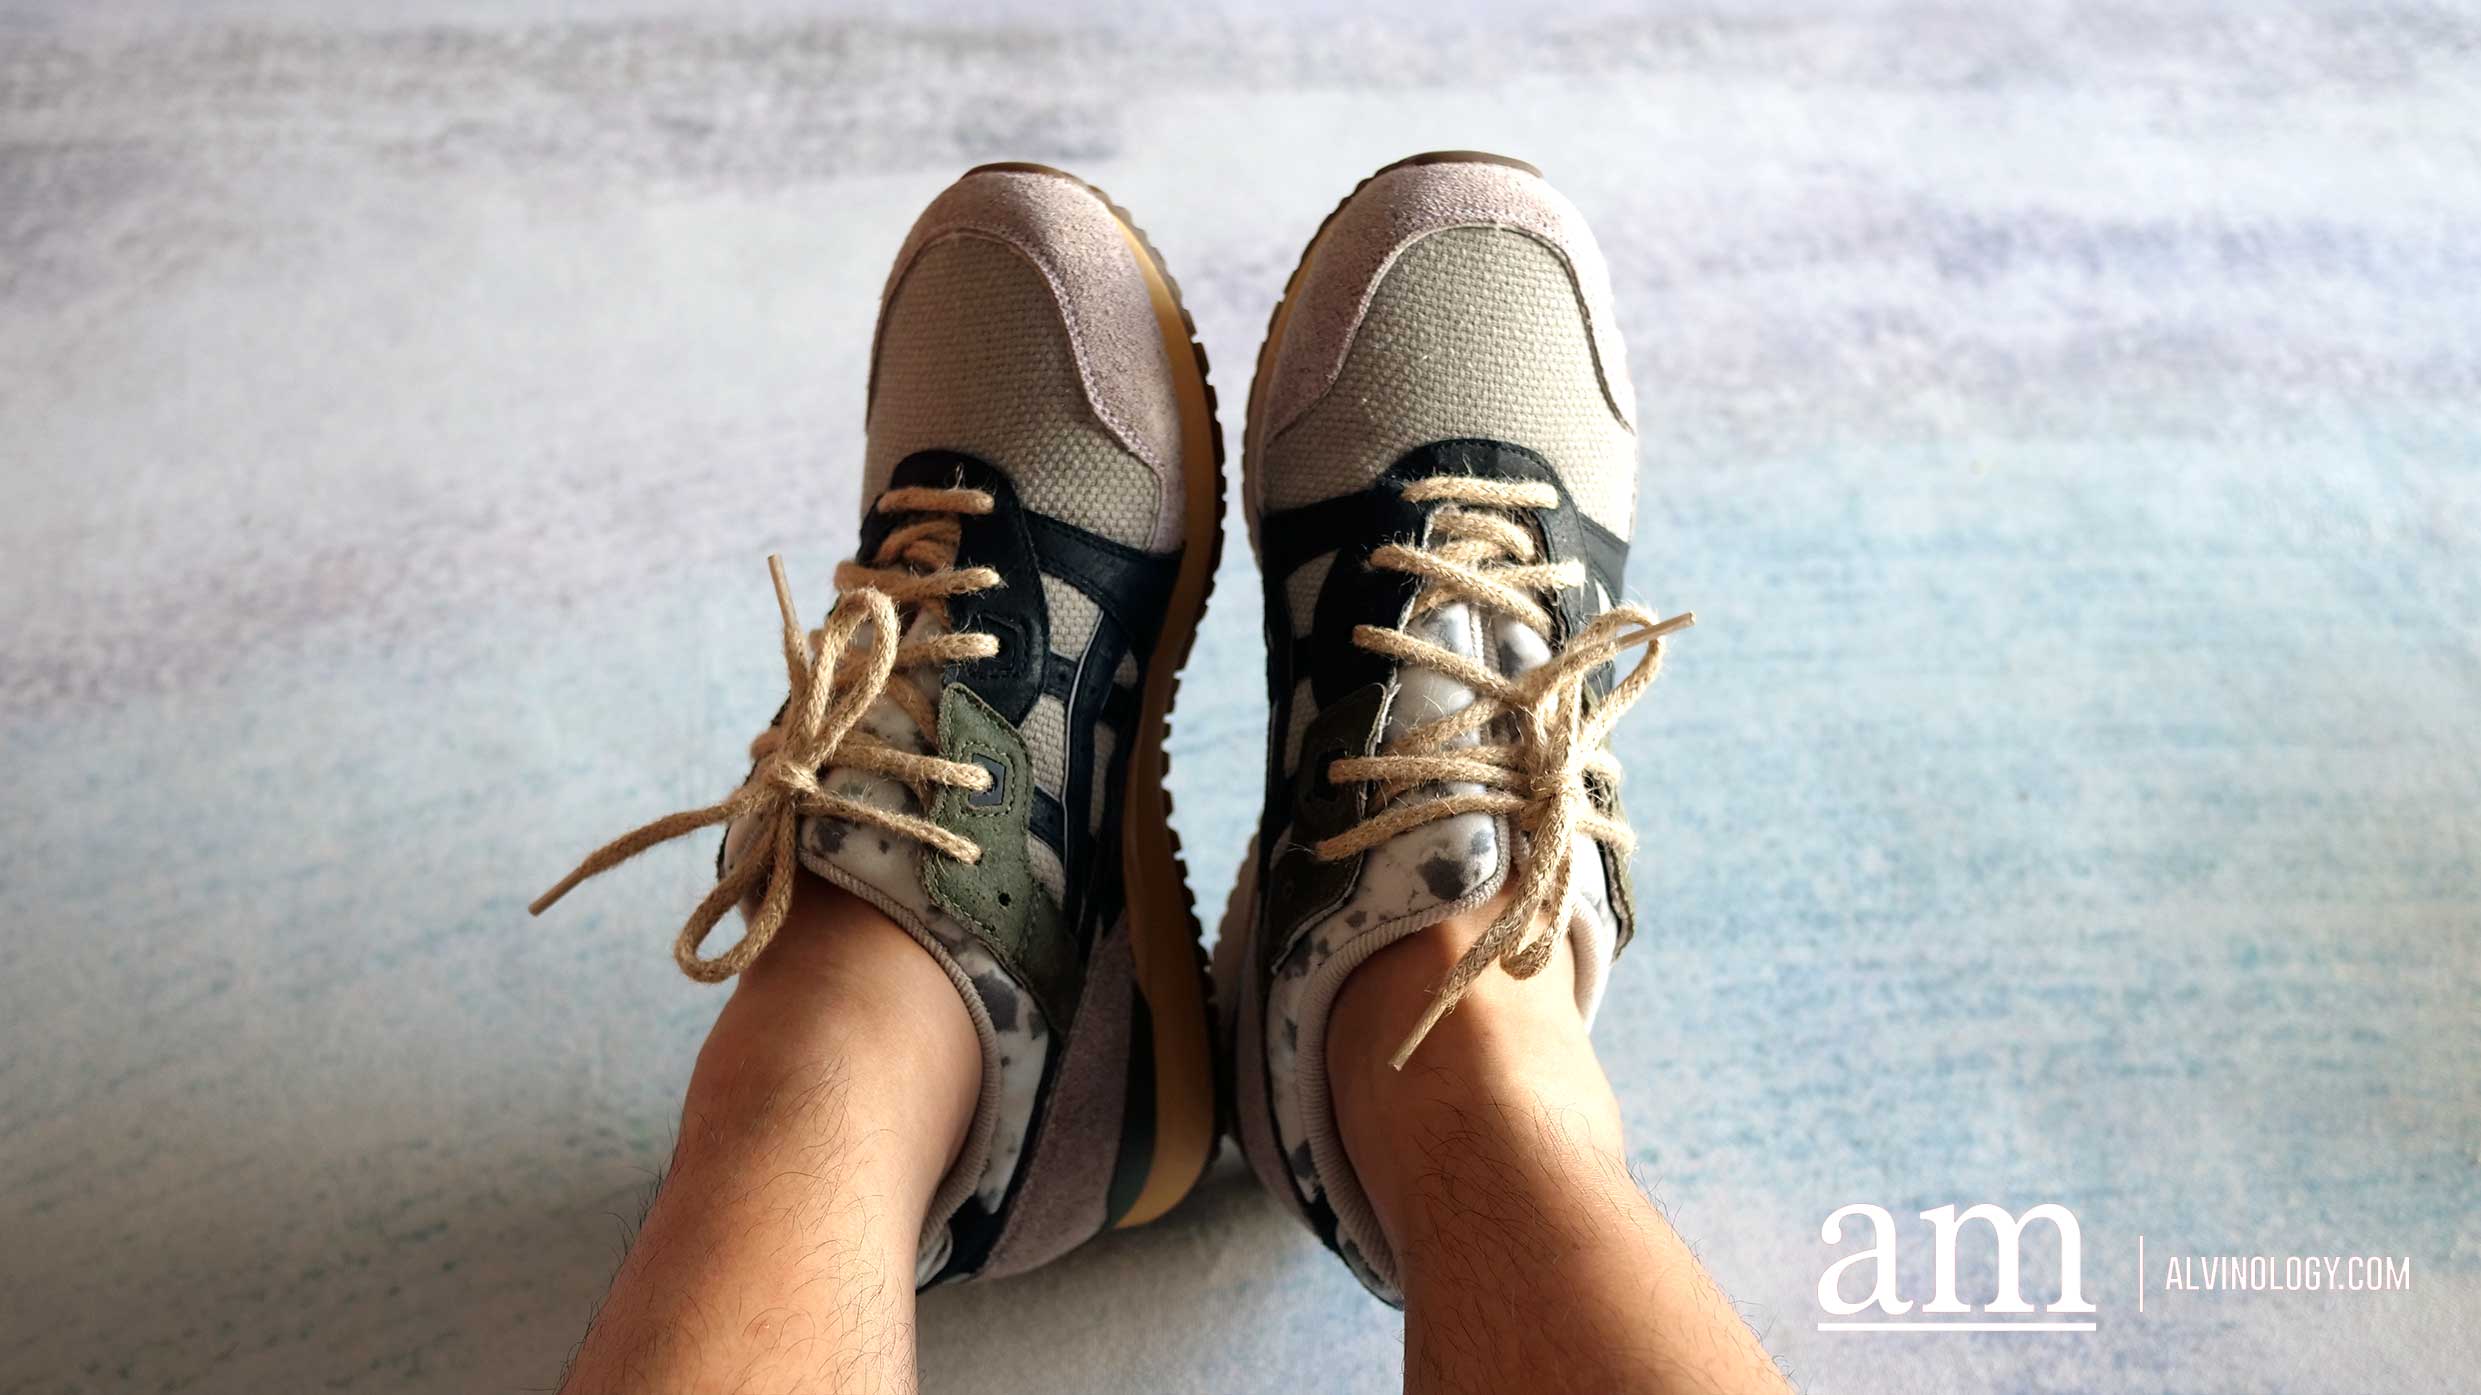 celebrar acortar Selección conjunta Review] ASICS Sportsyle's Iconic Gel-Lyte III OG gets an eco-friendly  rework - here are two